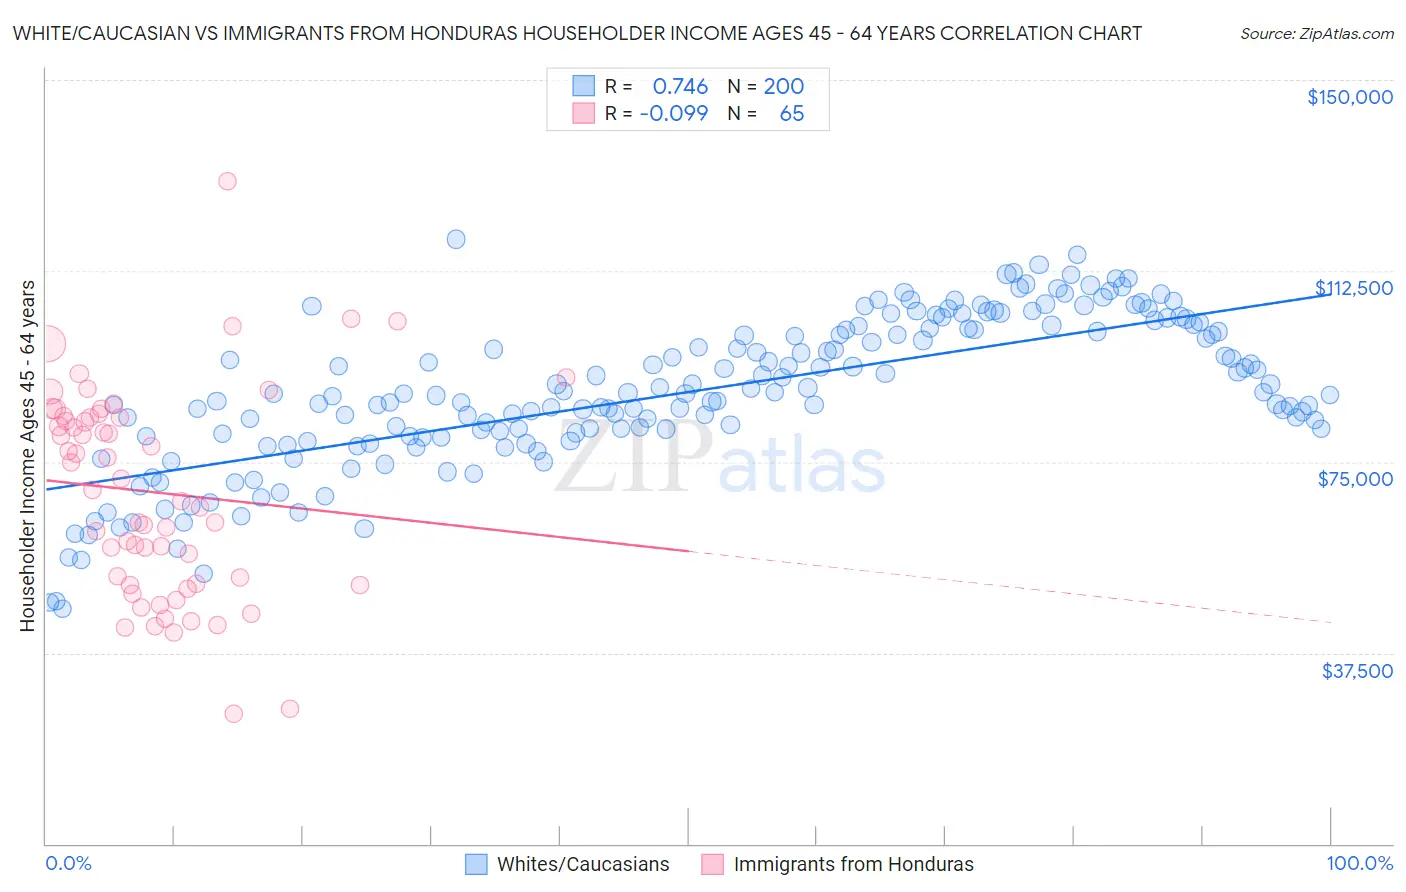 White/Caucasian vs Immigrants from Honduras Householder Income Ages 45 - 64 years